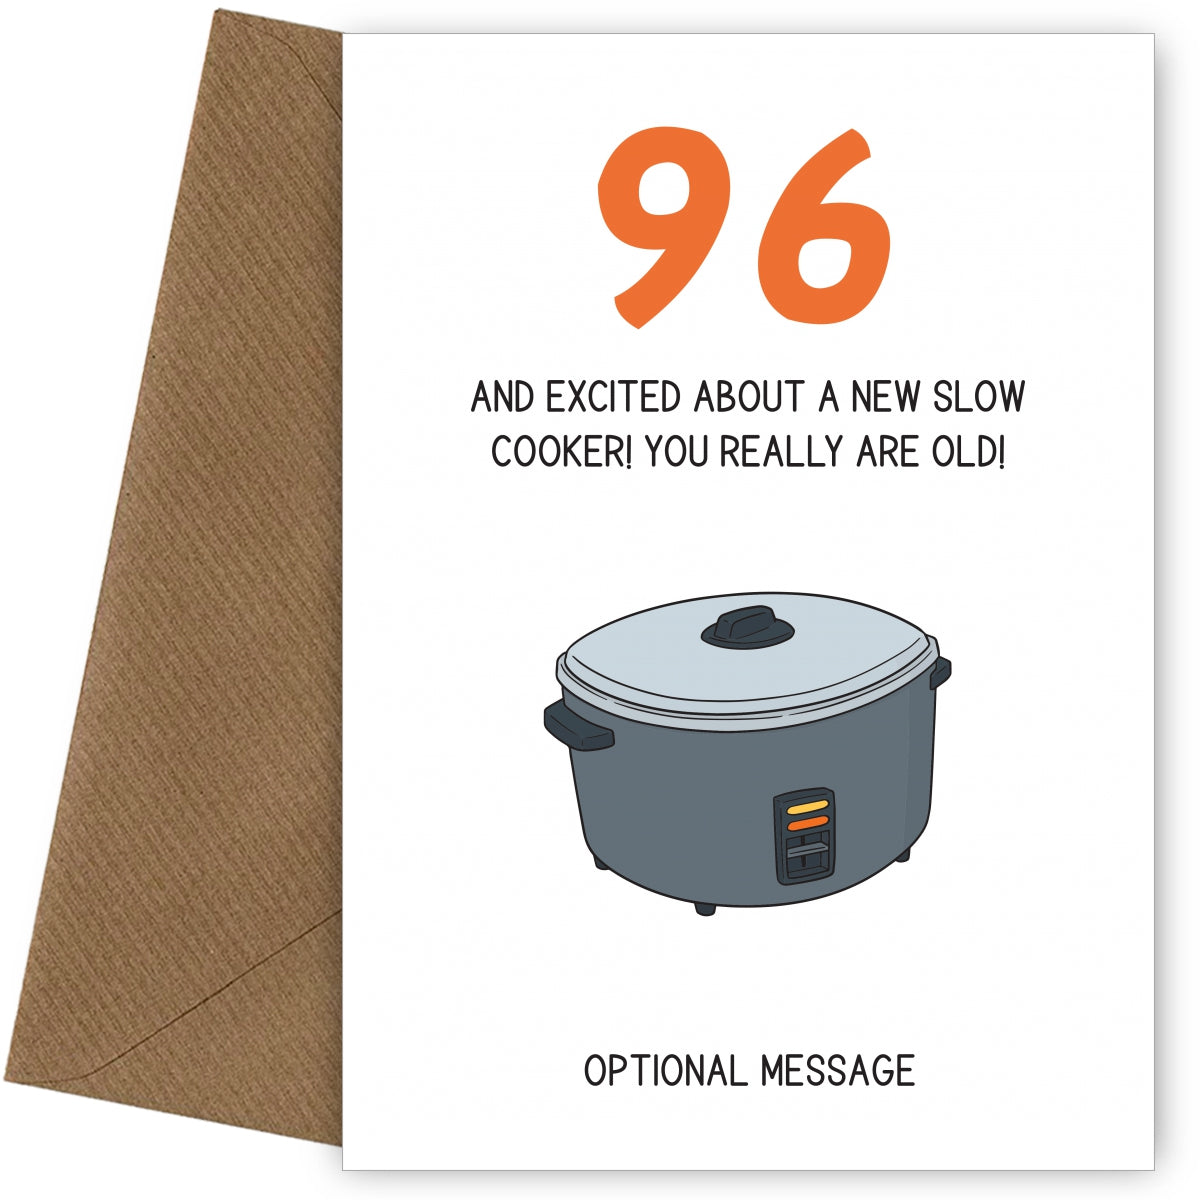 Happy 96th Birthday Card - Excited About a Slow Cooker!